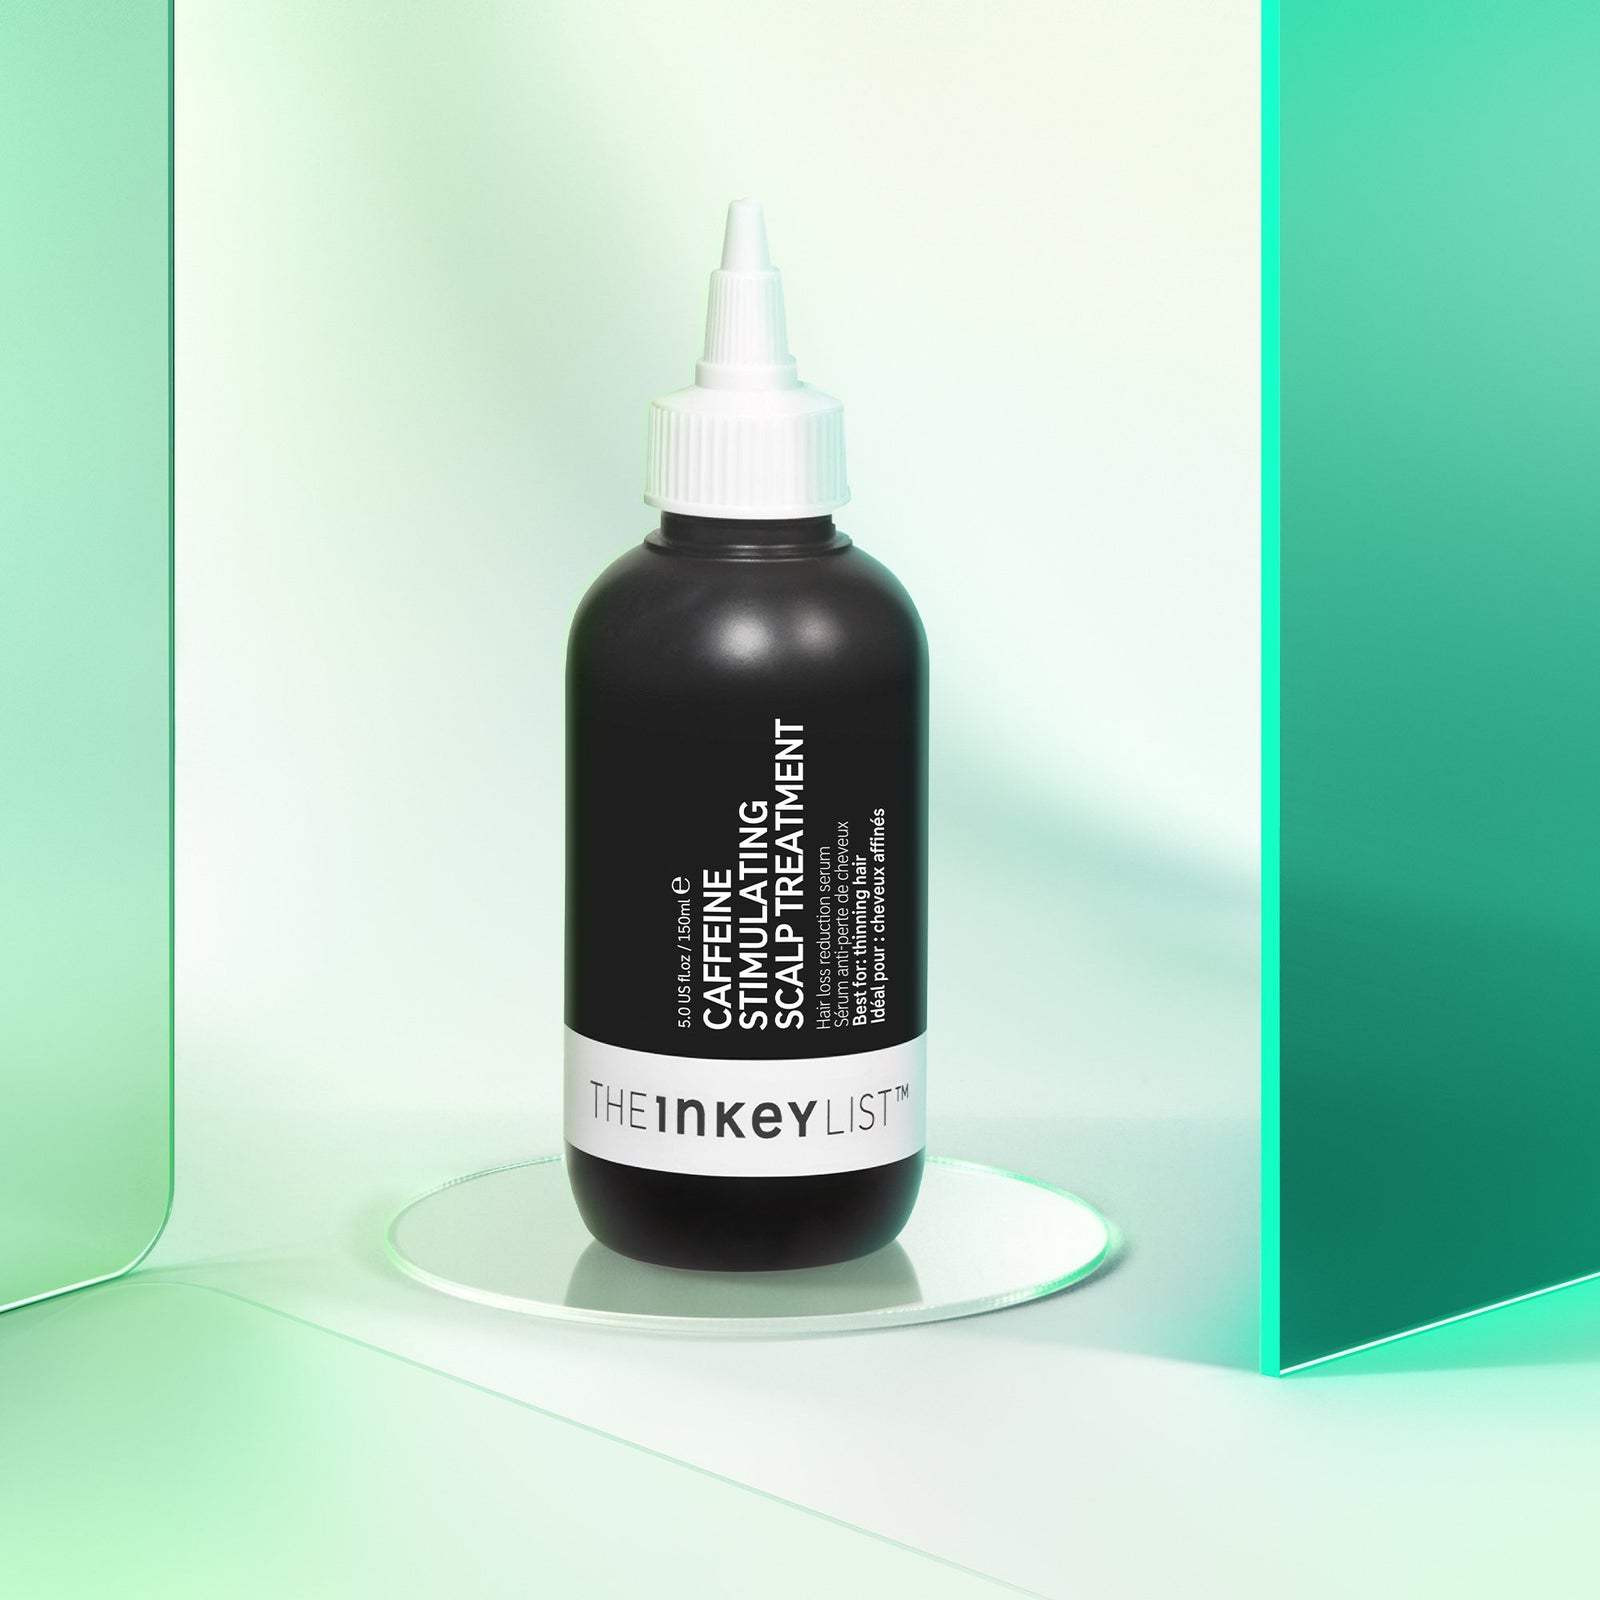 Caffeine stimulating scalp treatment product against a green background